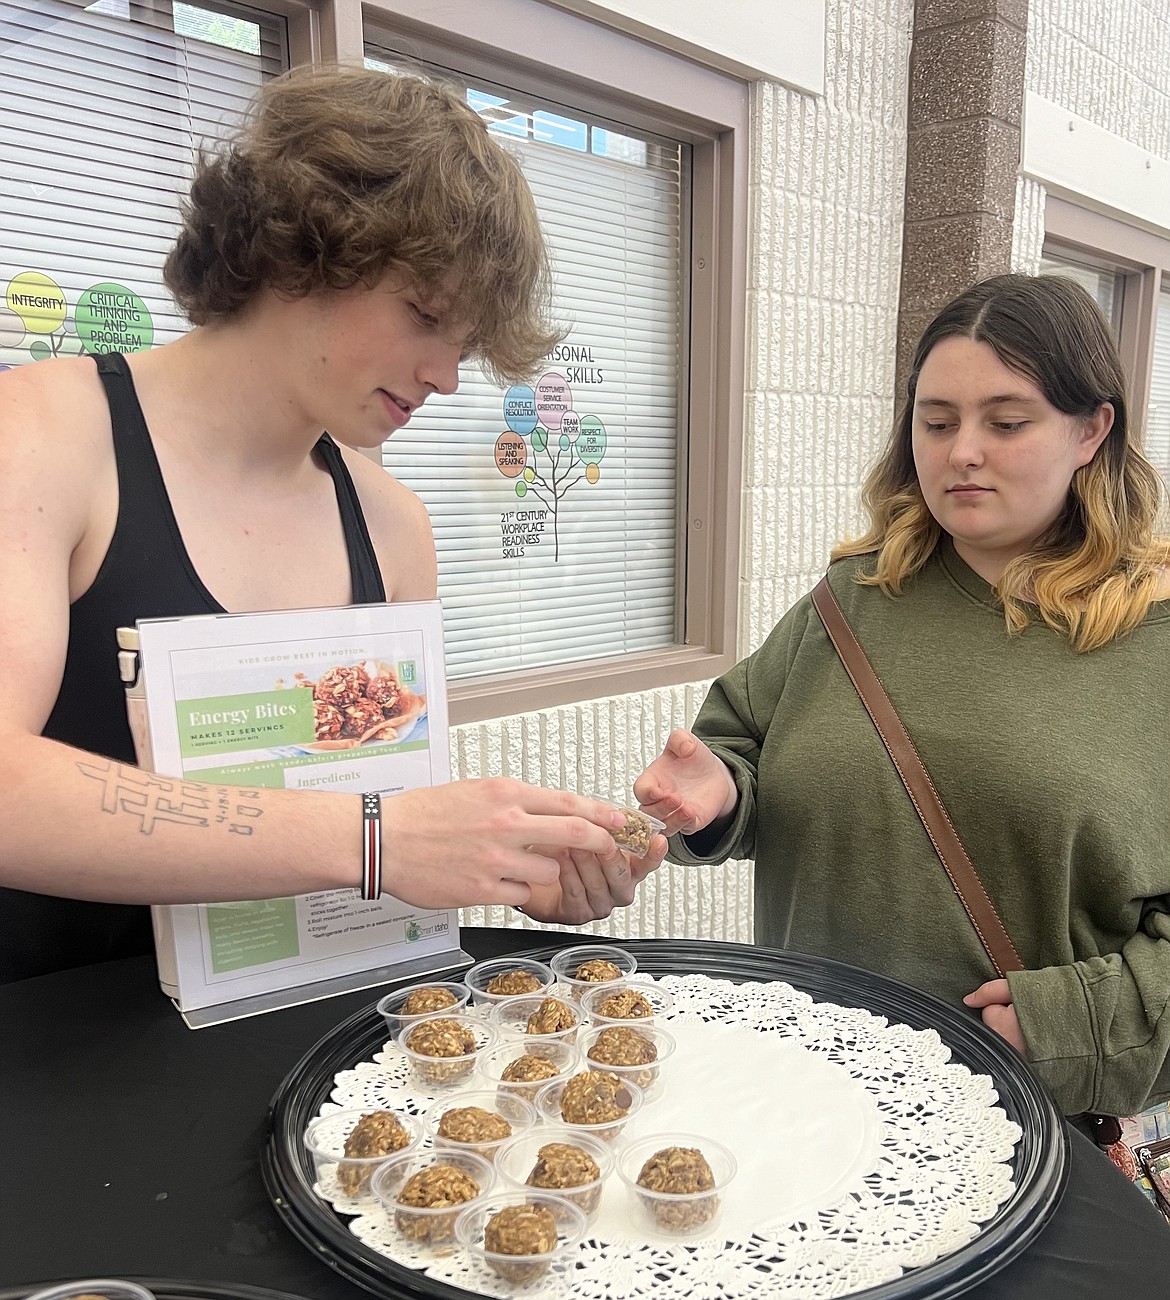 Senior Isaiah Butts offers a sample of no-bake energy bites to classmate Alex Garvin on Wednesday evening during Venture Academy's Exhibit Night.